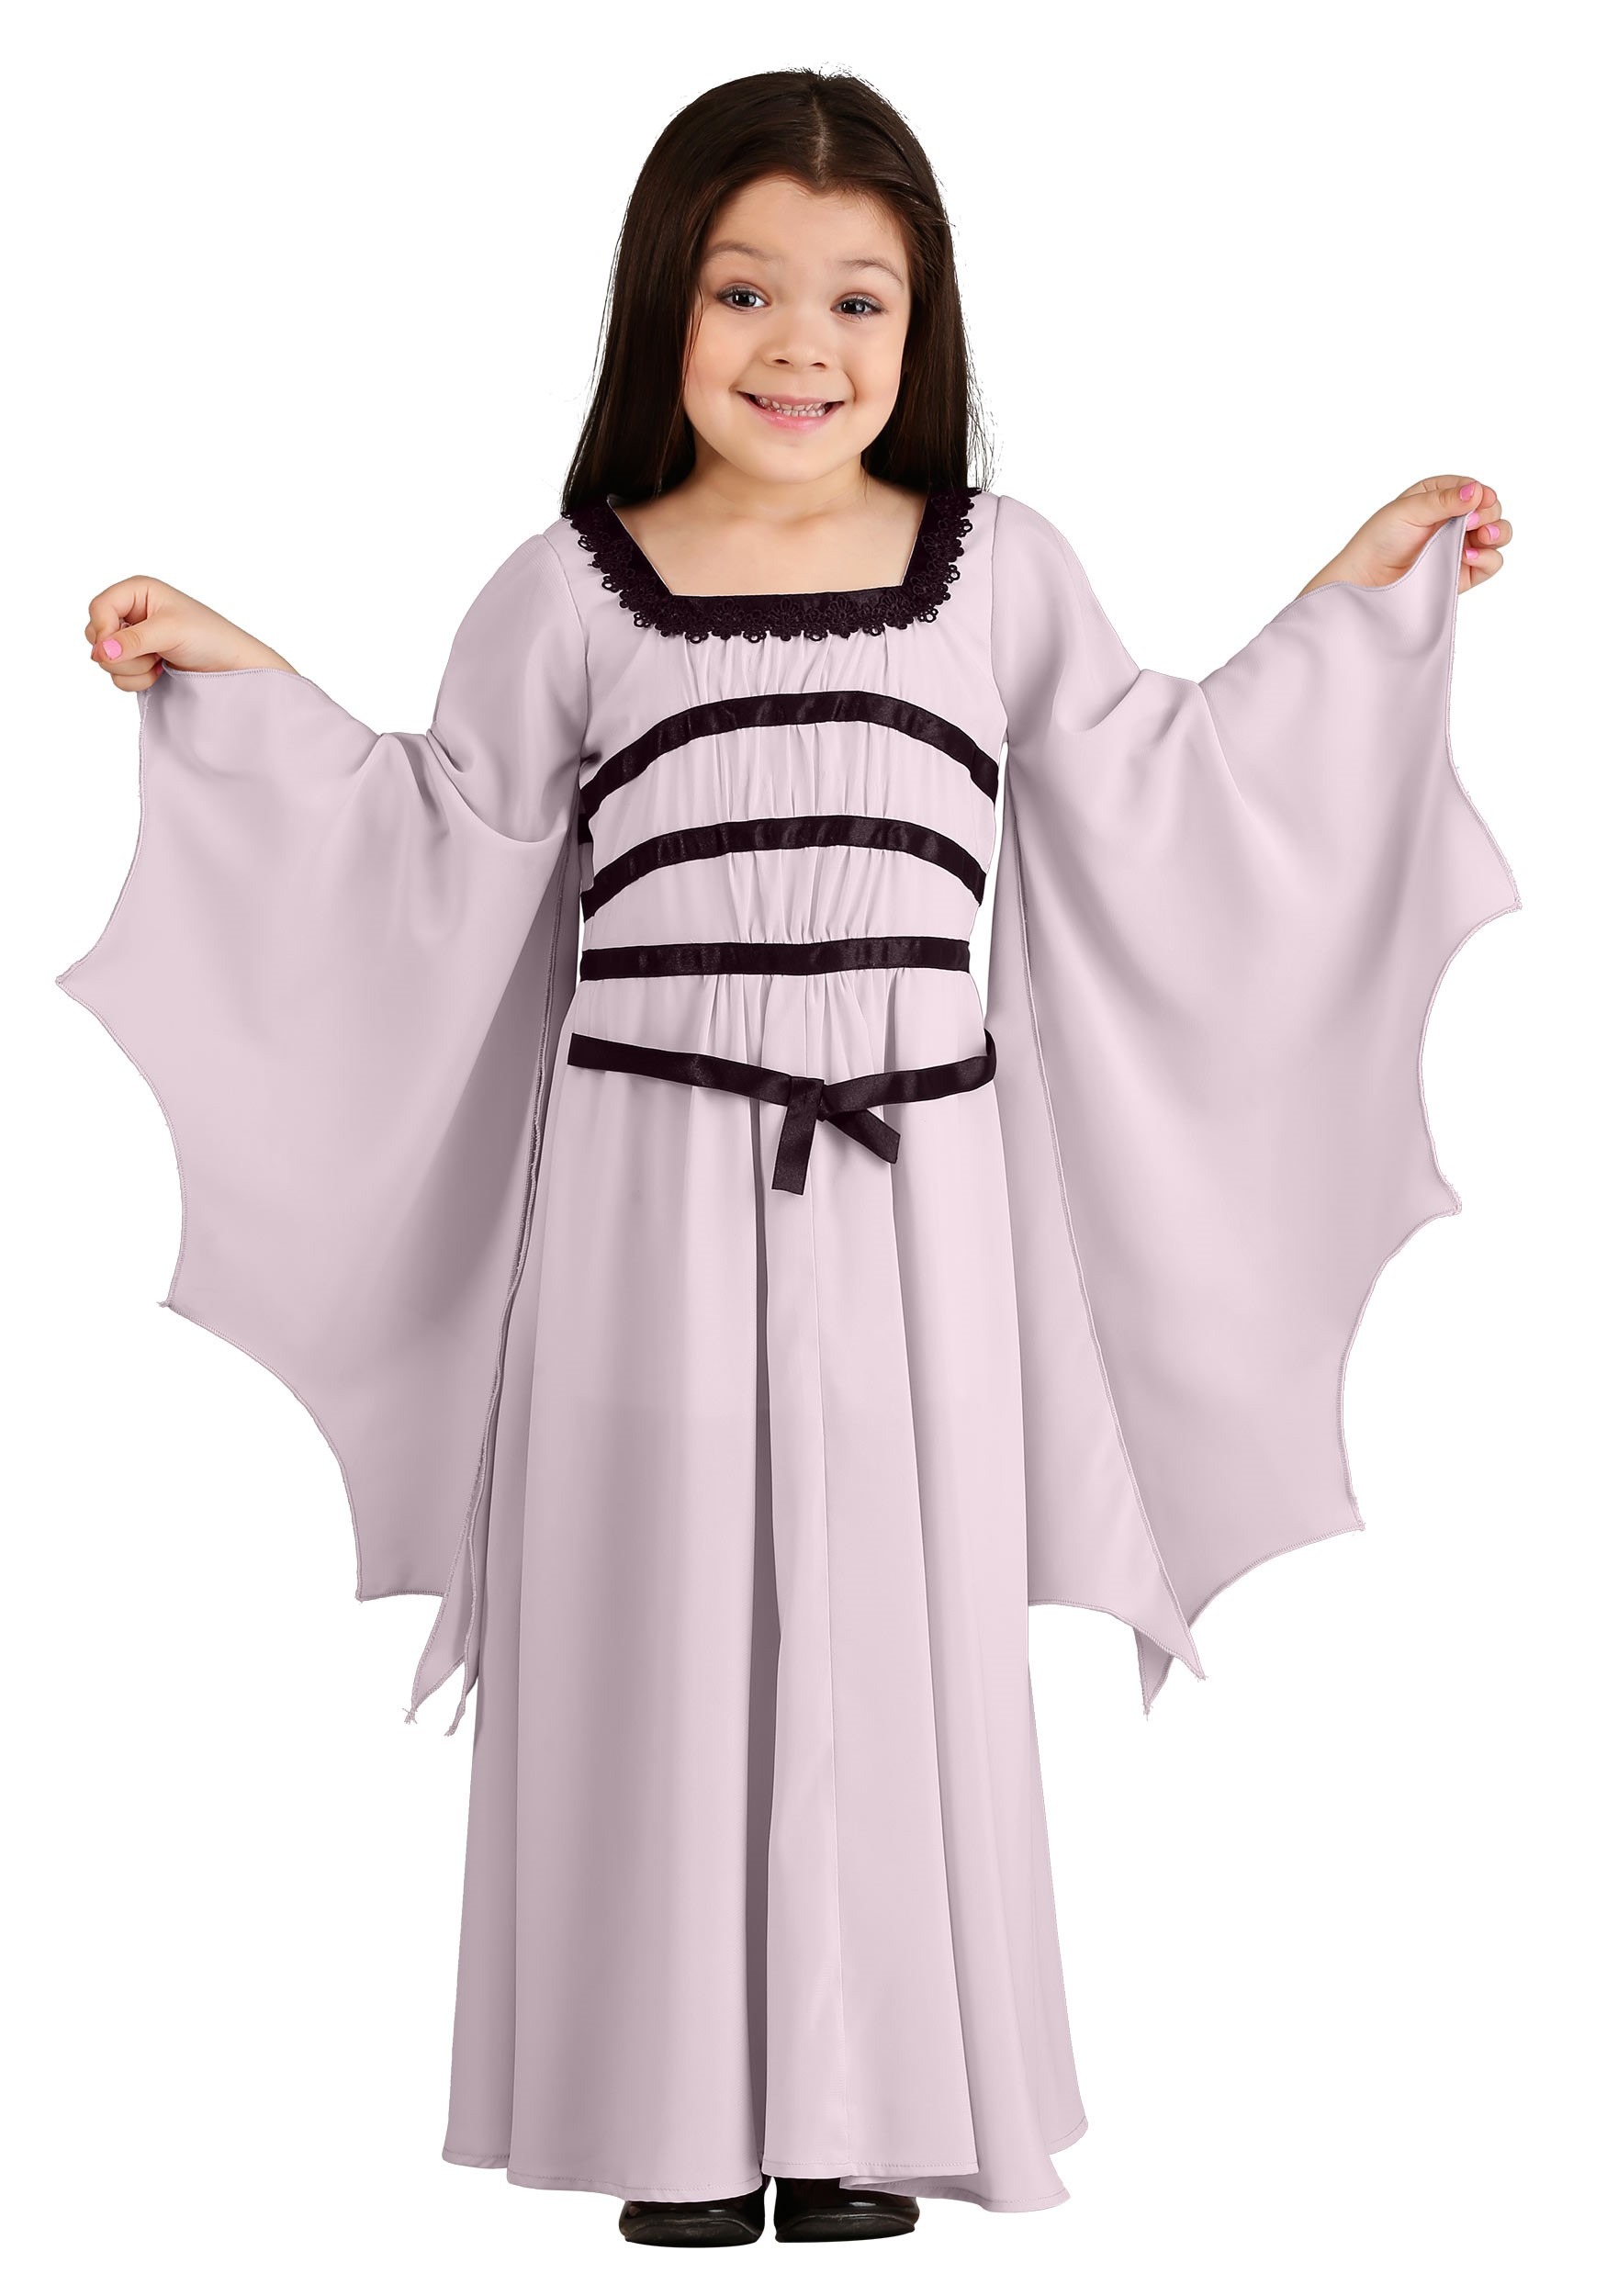 Toddler The Munsters Lily Costume